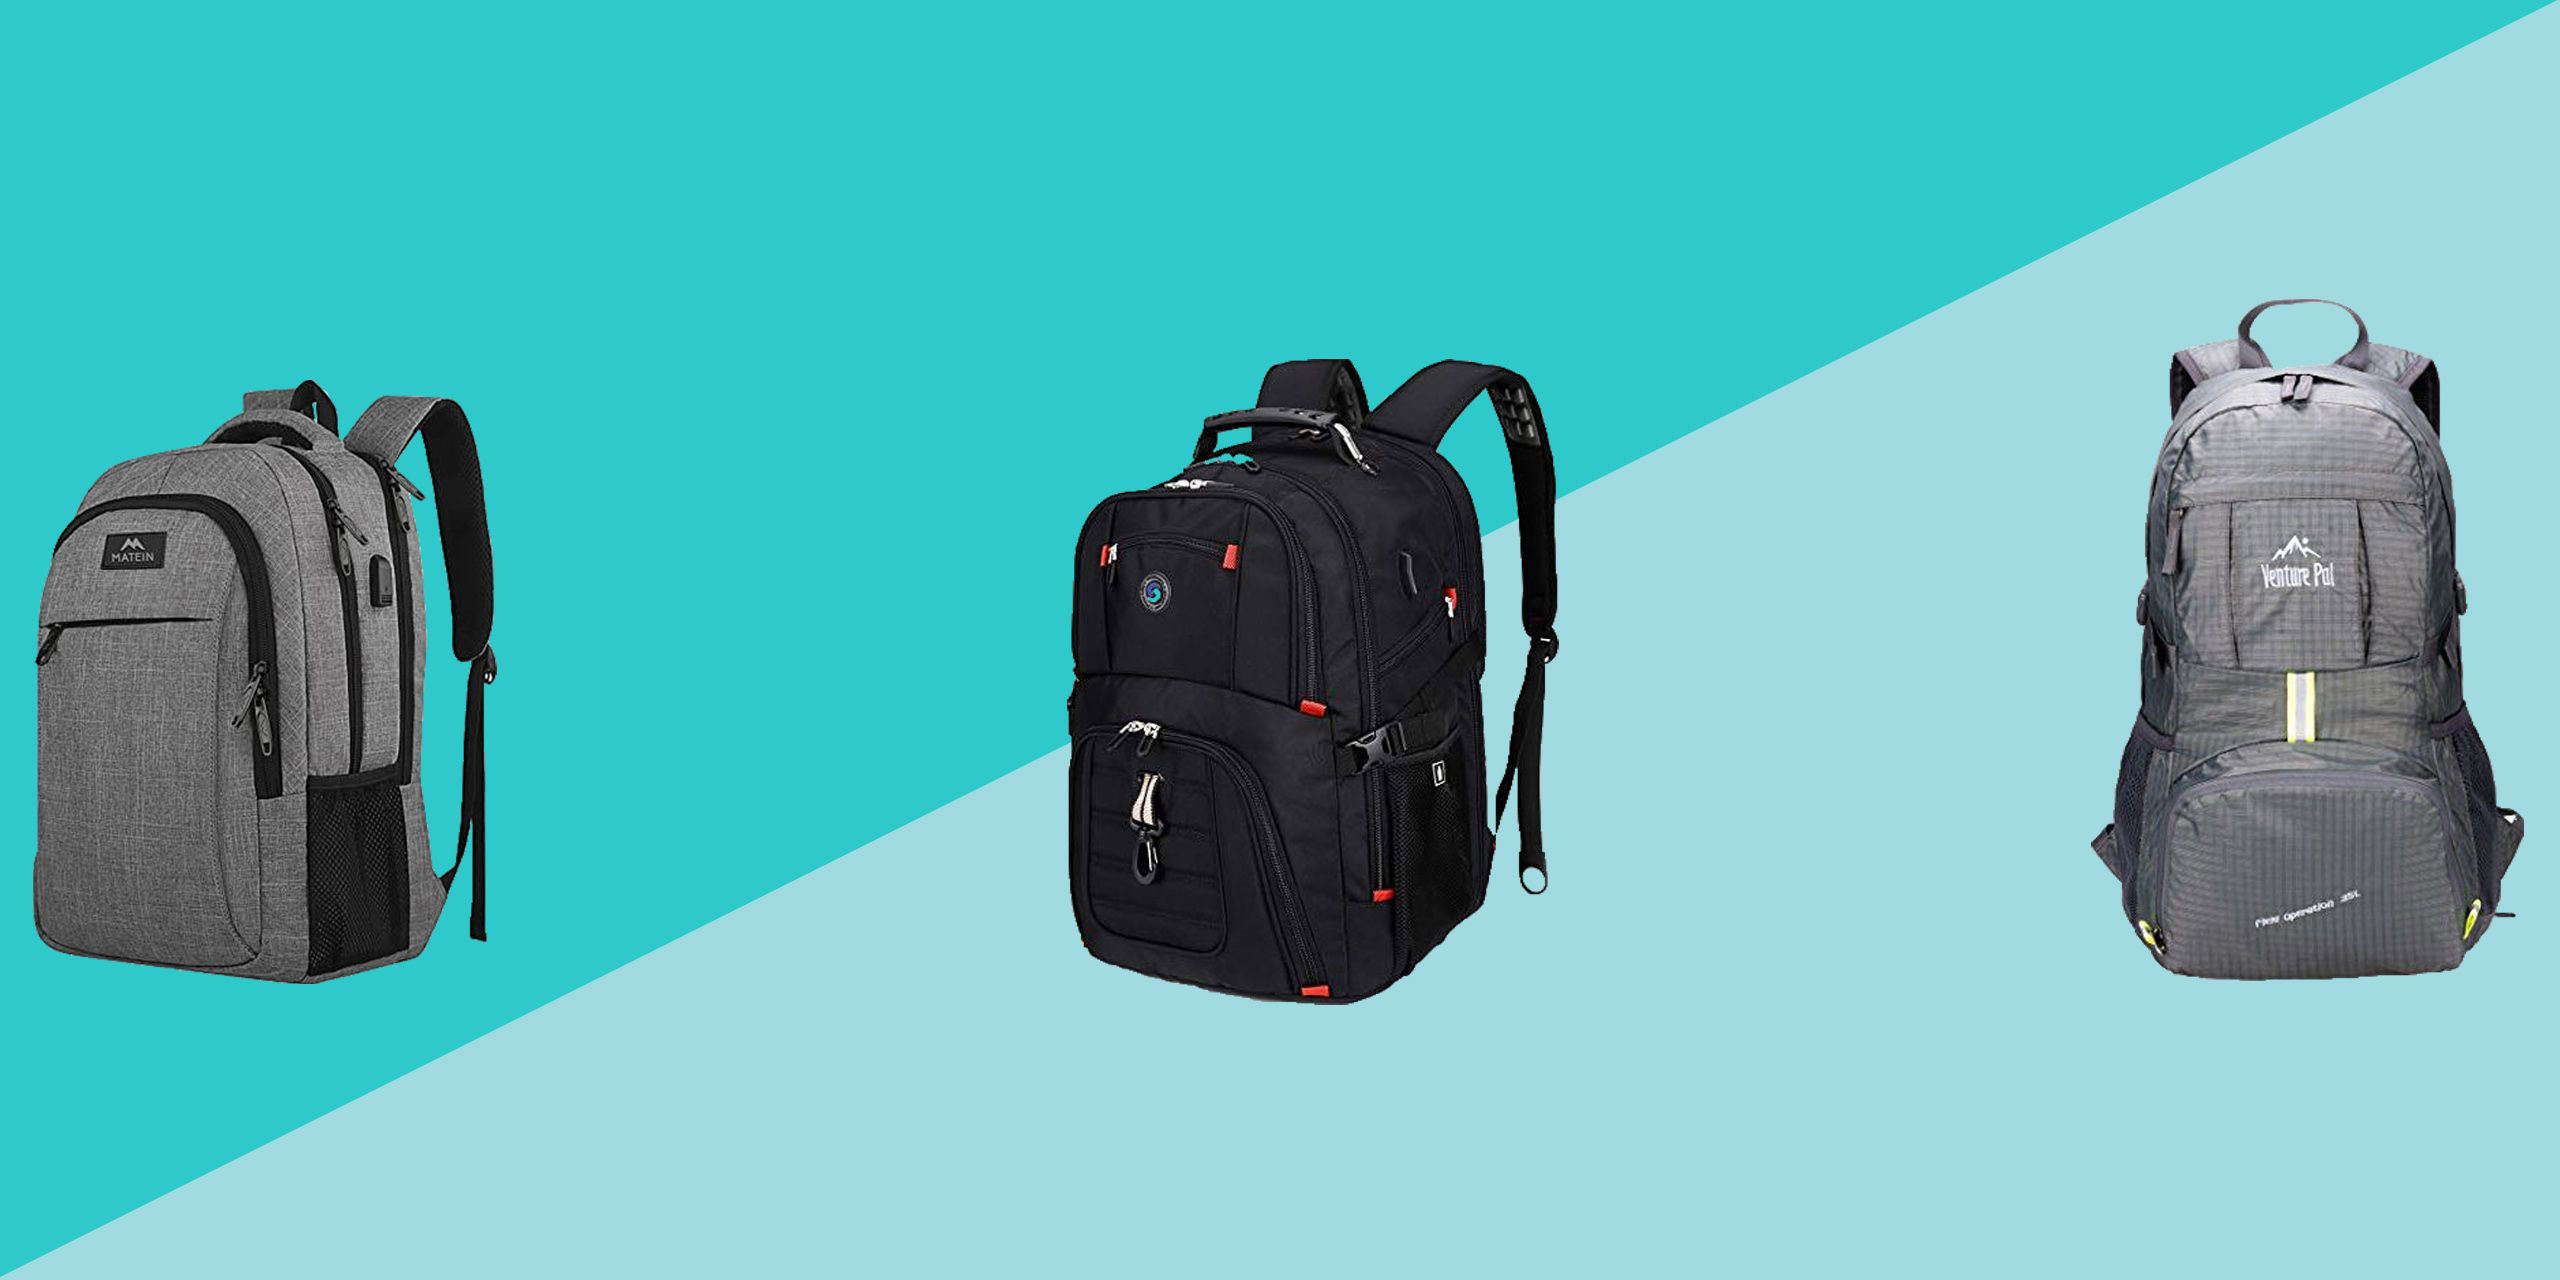 Bring One of These 21 Top-Rated Travel Backpacks on Your Next Vacation